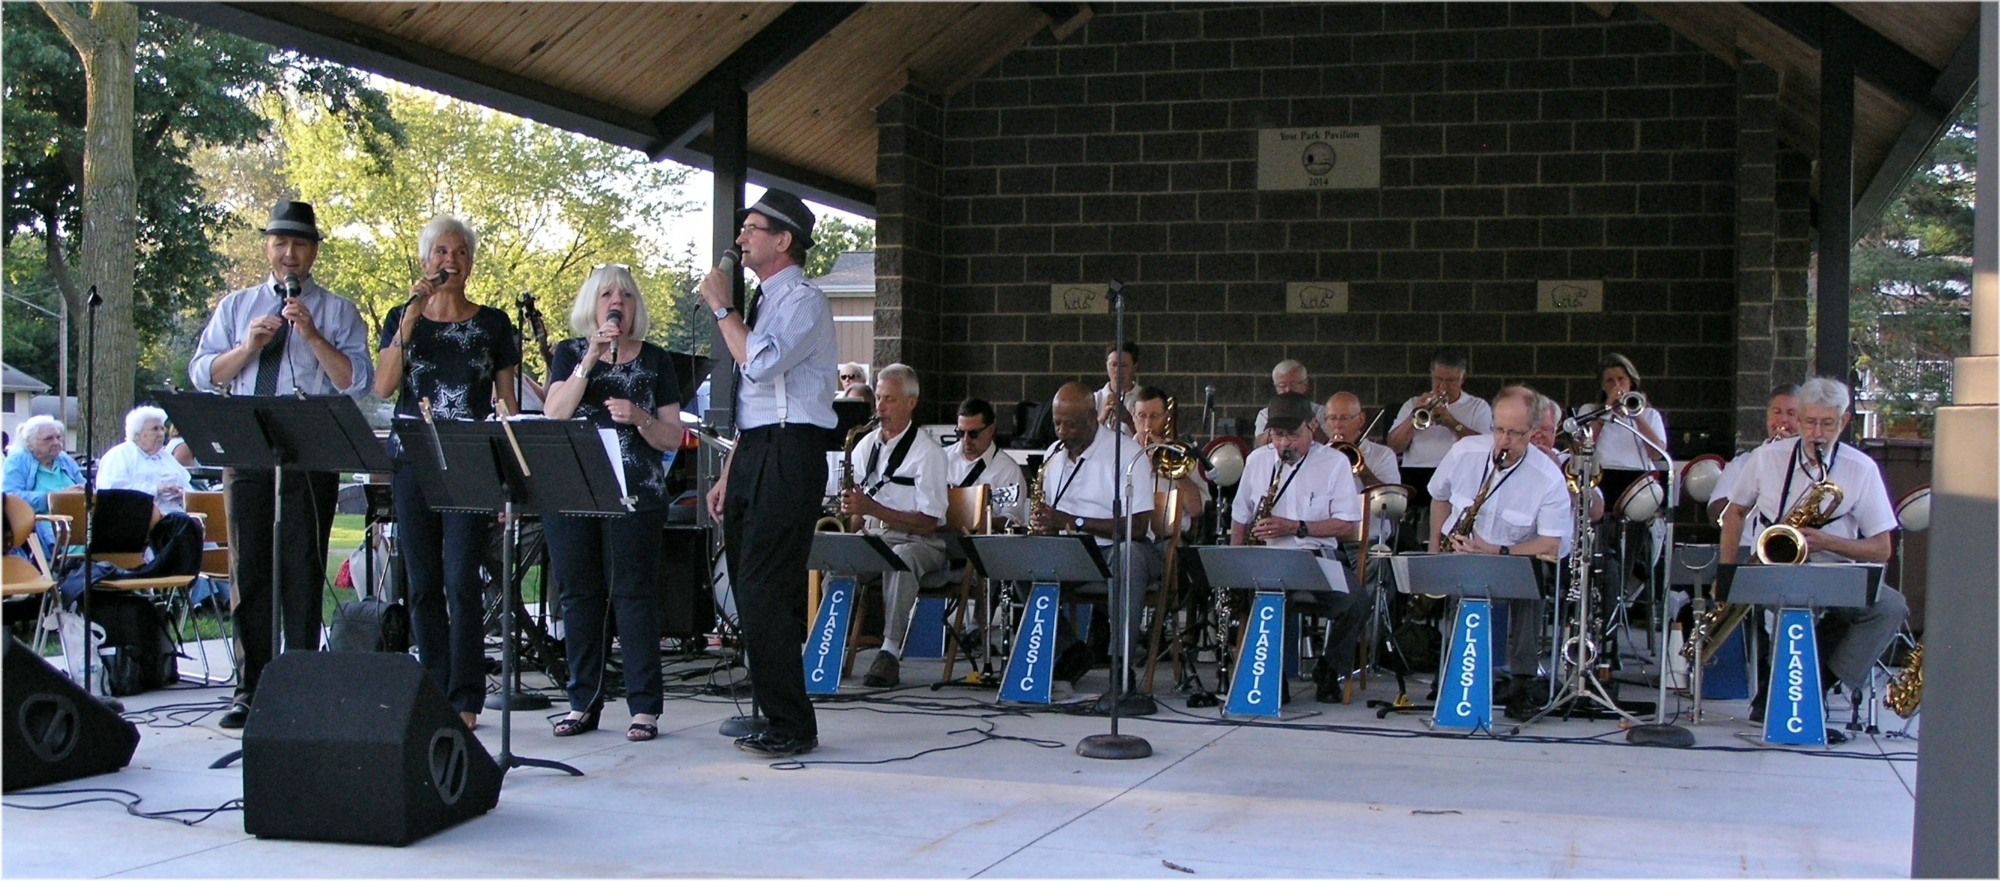 Jody singing with a big band